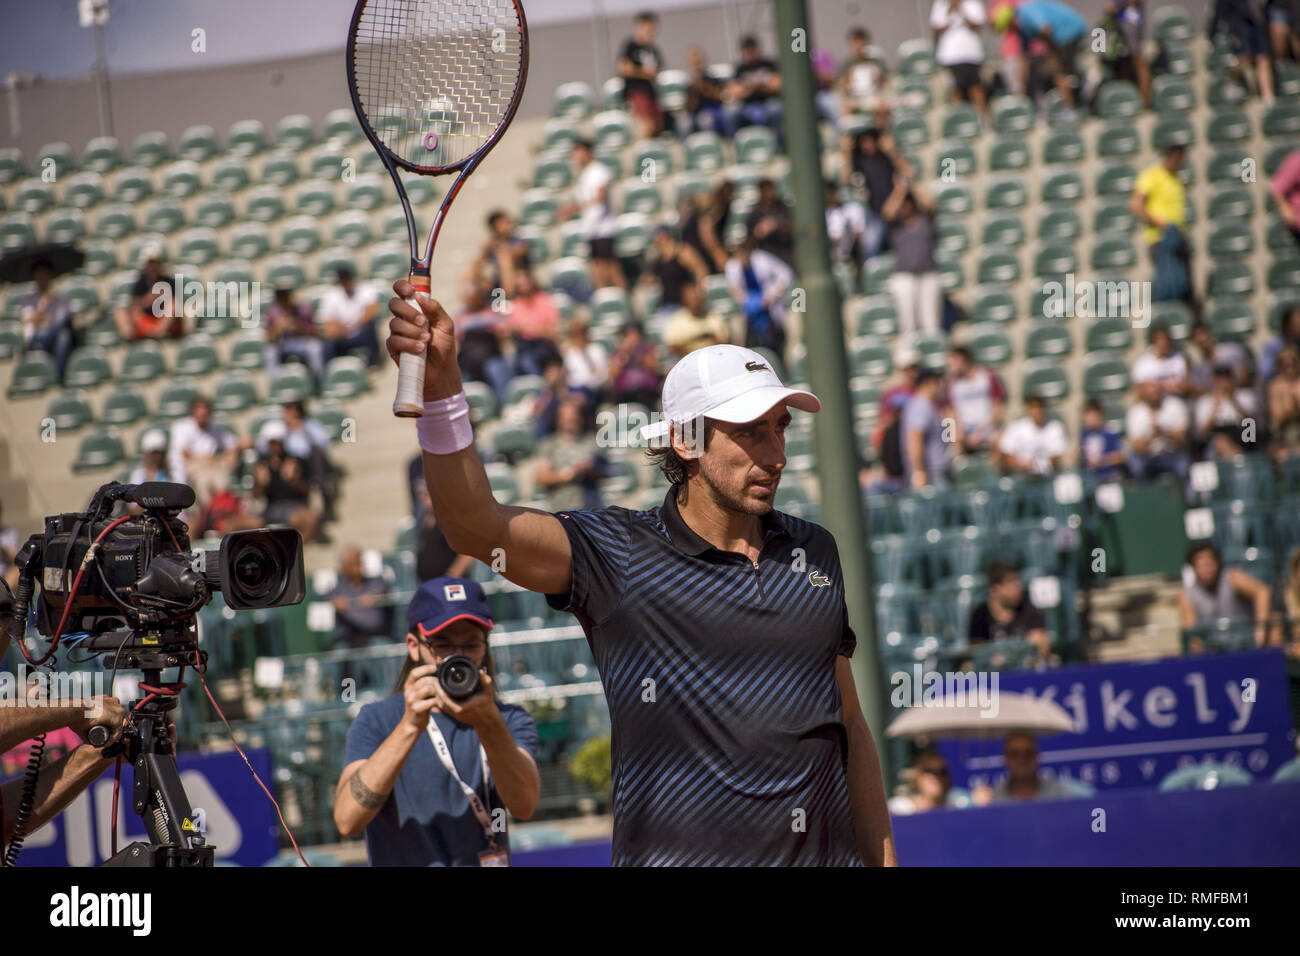 Buenos Aires, Federal Capital, Argentina. 14th Feb, 2019. The Uruguayan Pablo Cuevas achieves his qualification to the quarterfinals in the Argentina Open 2019 after beating the Portuguese Joao Sousa, fifth seed, with a score of 6-4, 7-5. His opponent will leave the meeting that will be held this afternoon between the favorite of the tournament and first pre-qualifier Dominic Thiem of Austria and the German Maximilian Marterer. Credit: Roberto Almeida Aveledo/ZUMA Wire/Alamy Live News Stock Photo